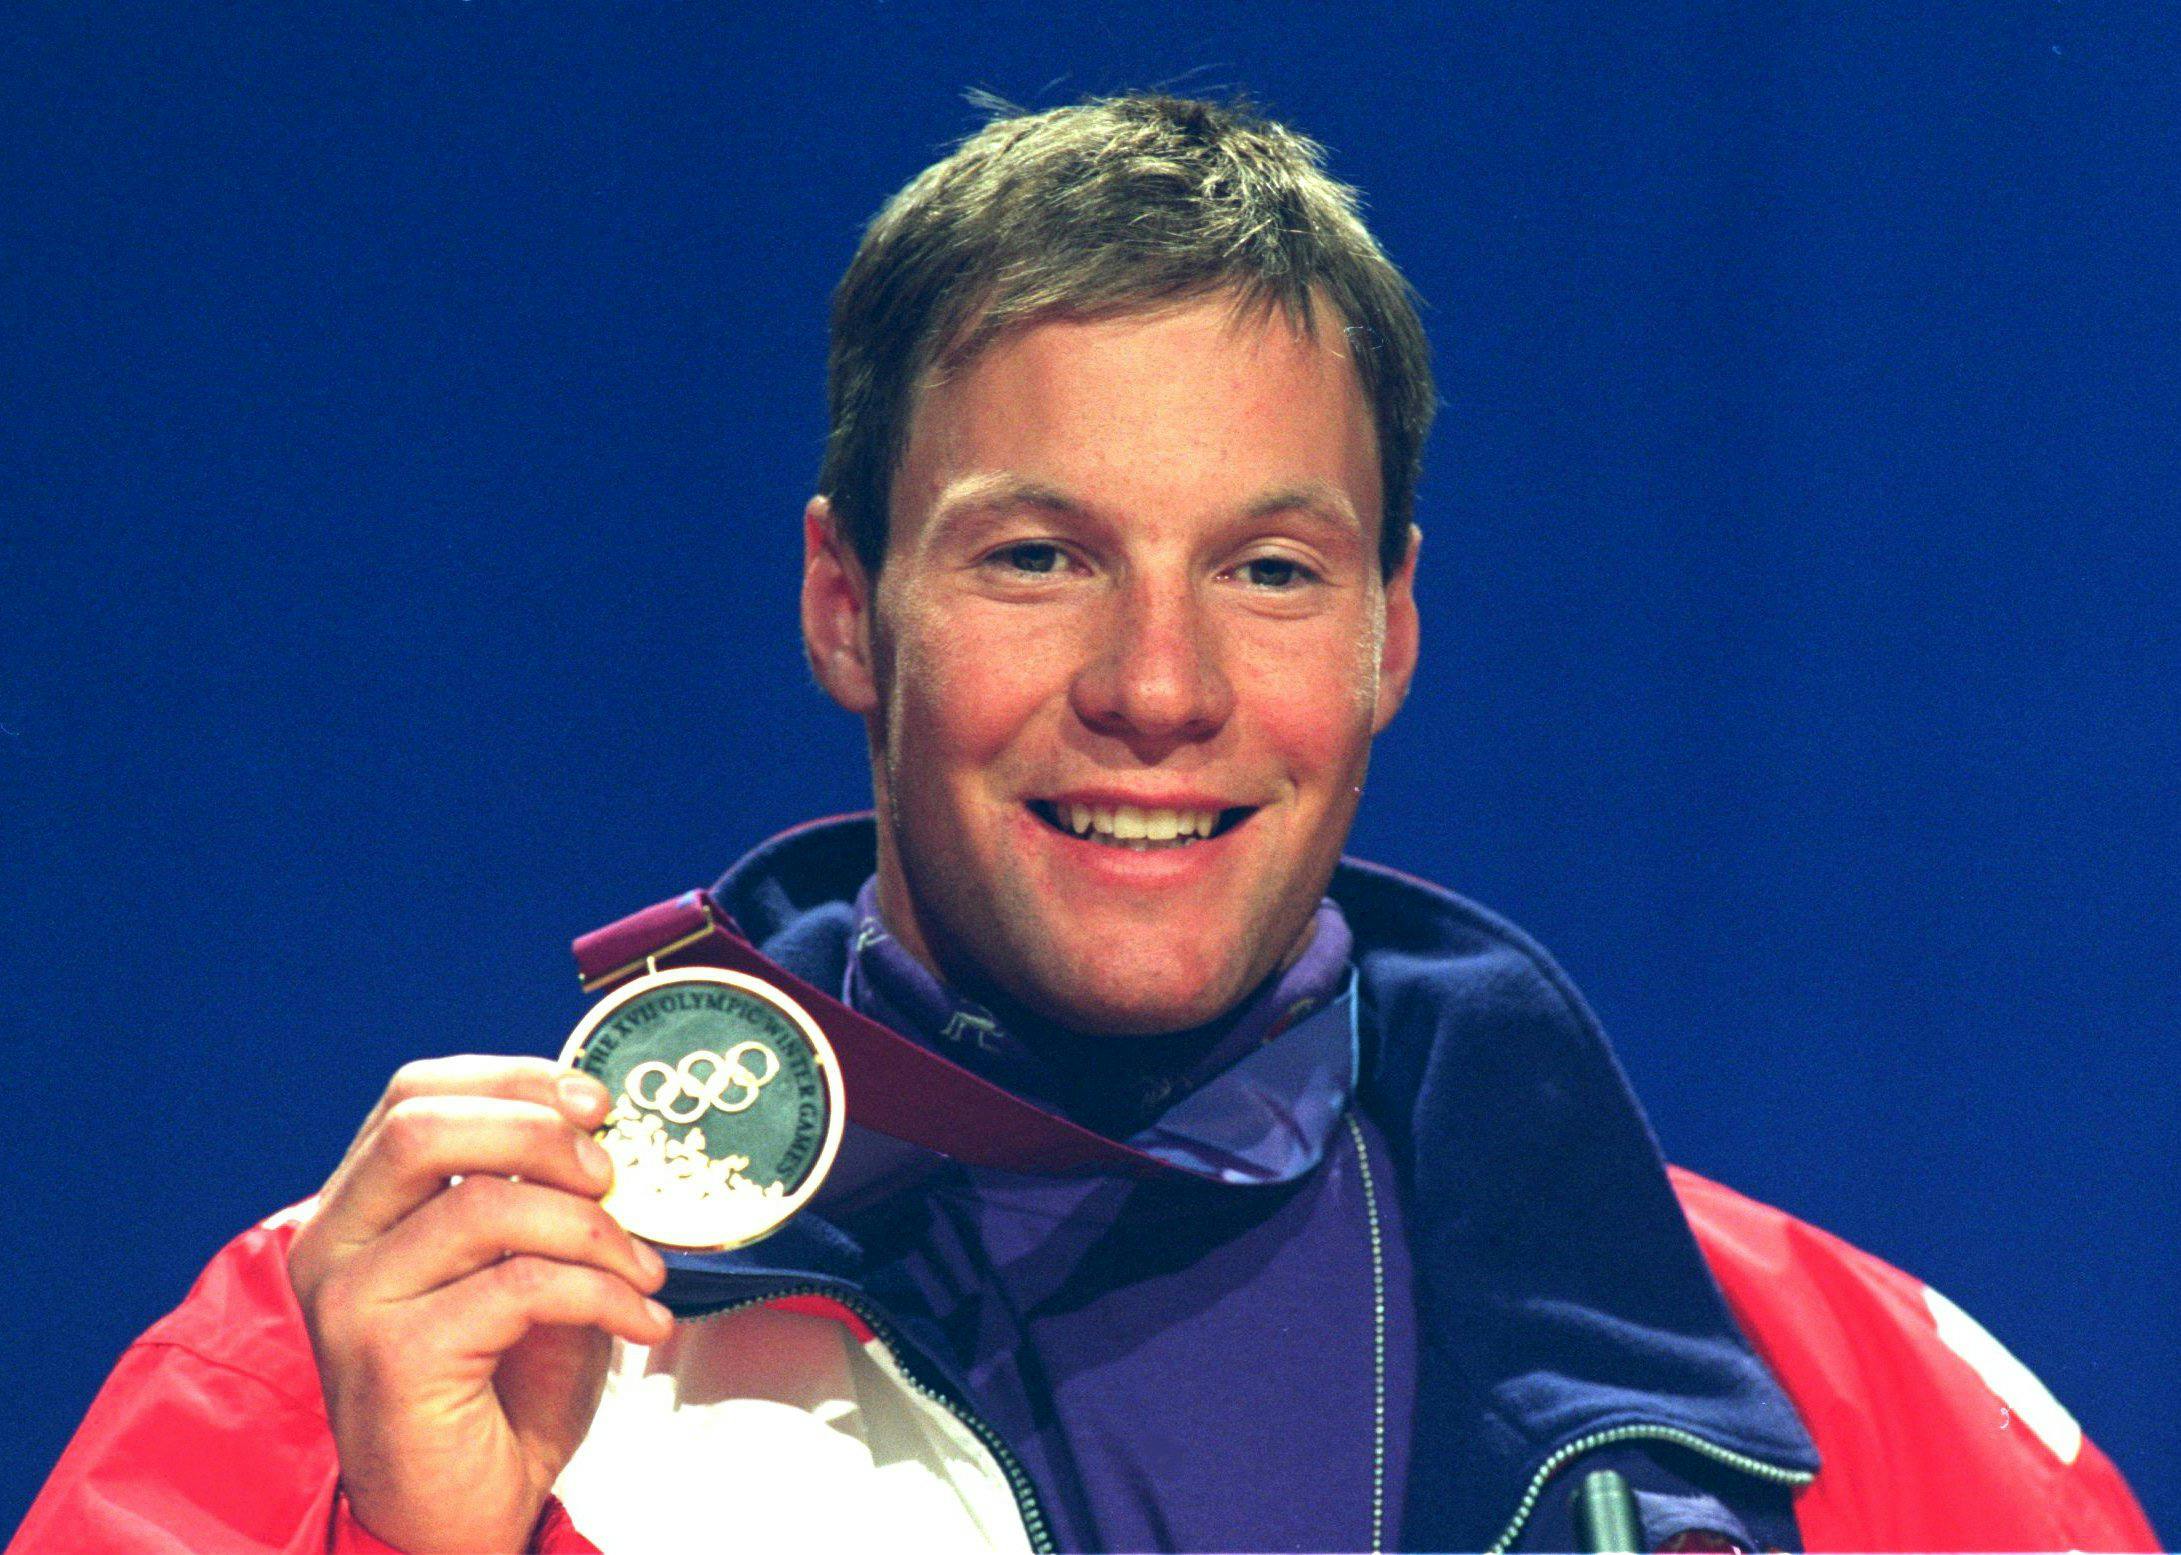 Tommy Moe holds up a gold medal